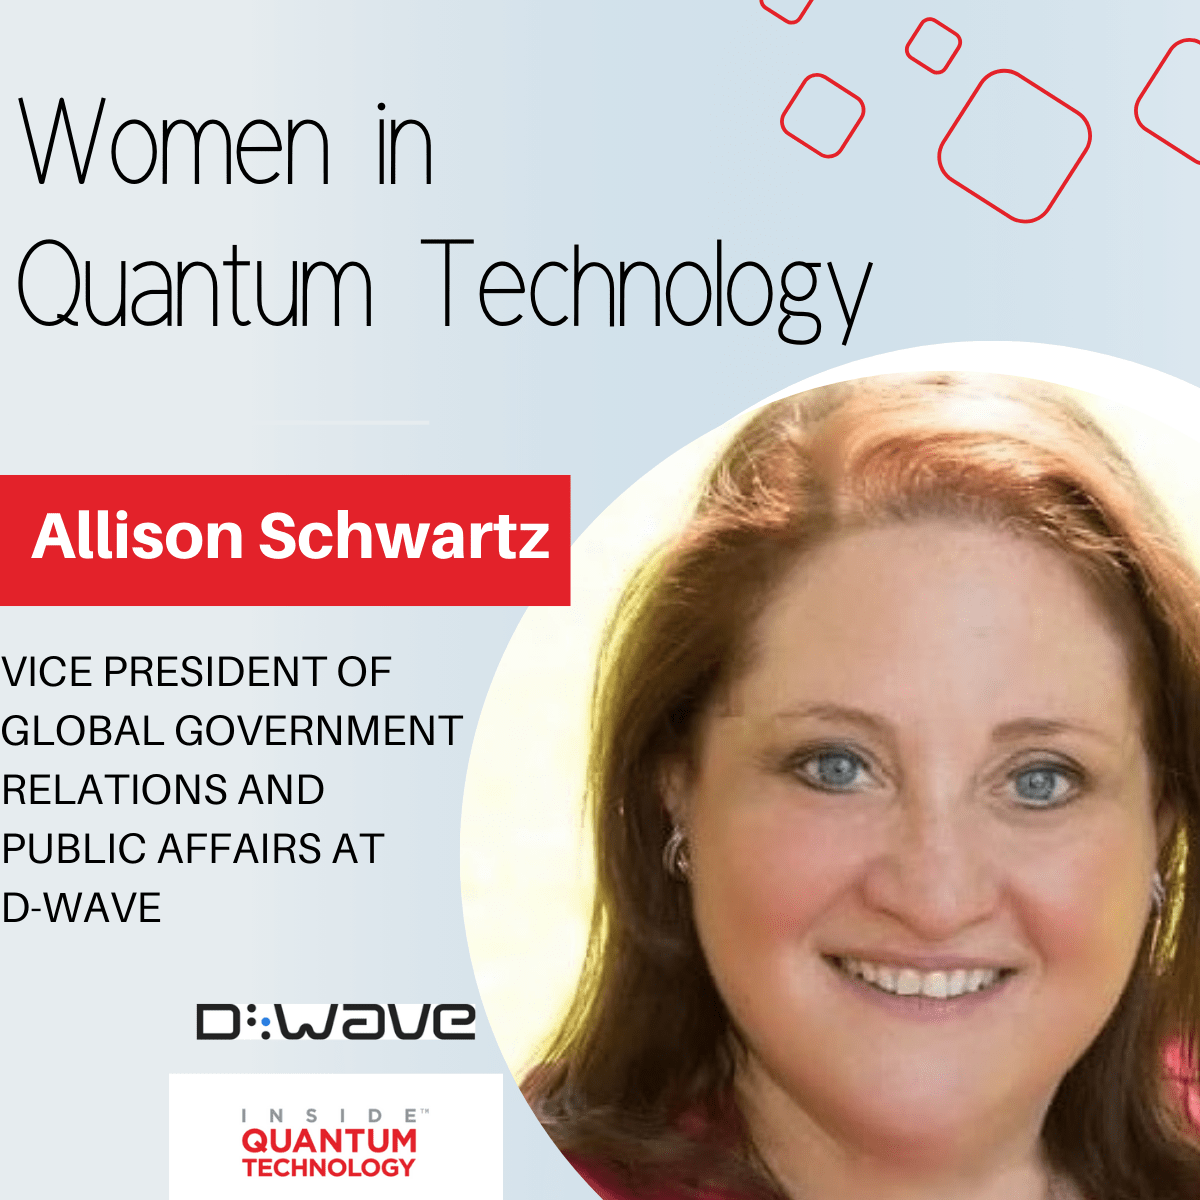 Allison Schwartz, Vice President of Global Government Relations and Public Affairs at D-Wave, shares her journey into the quantum tech ecosystem